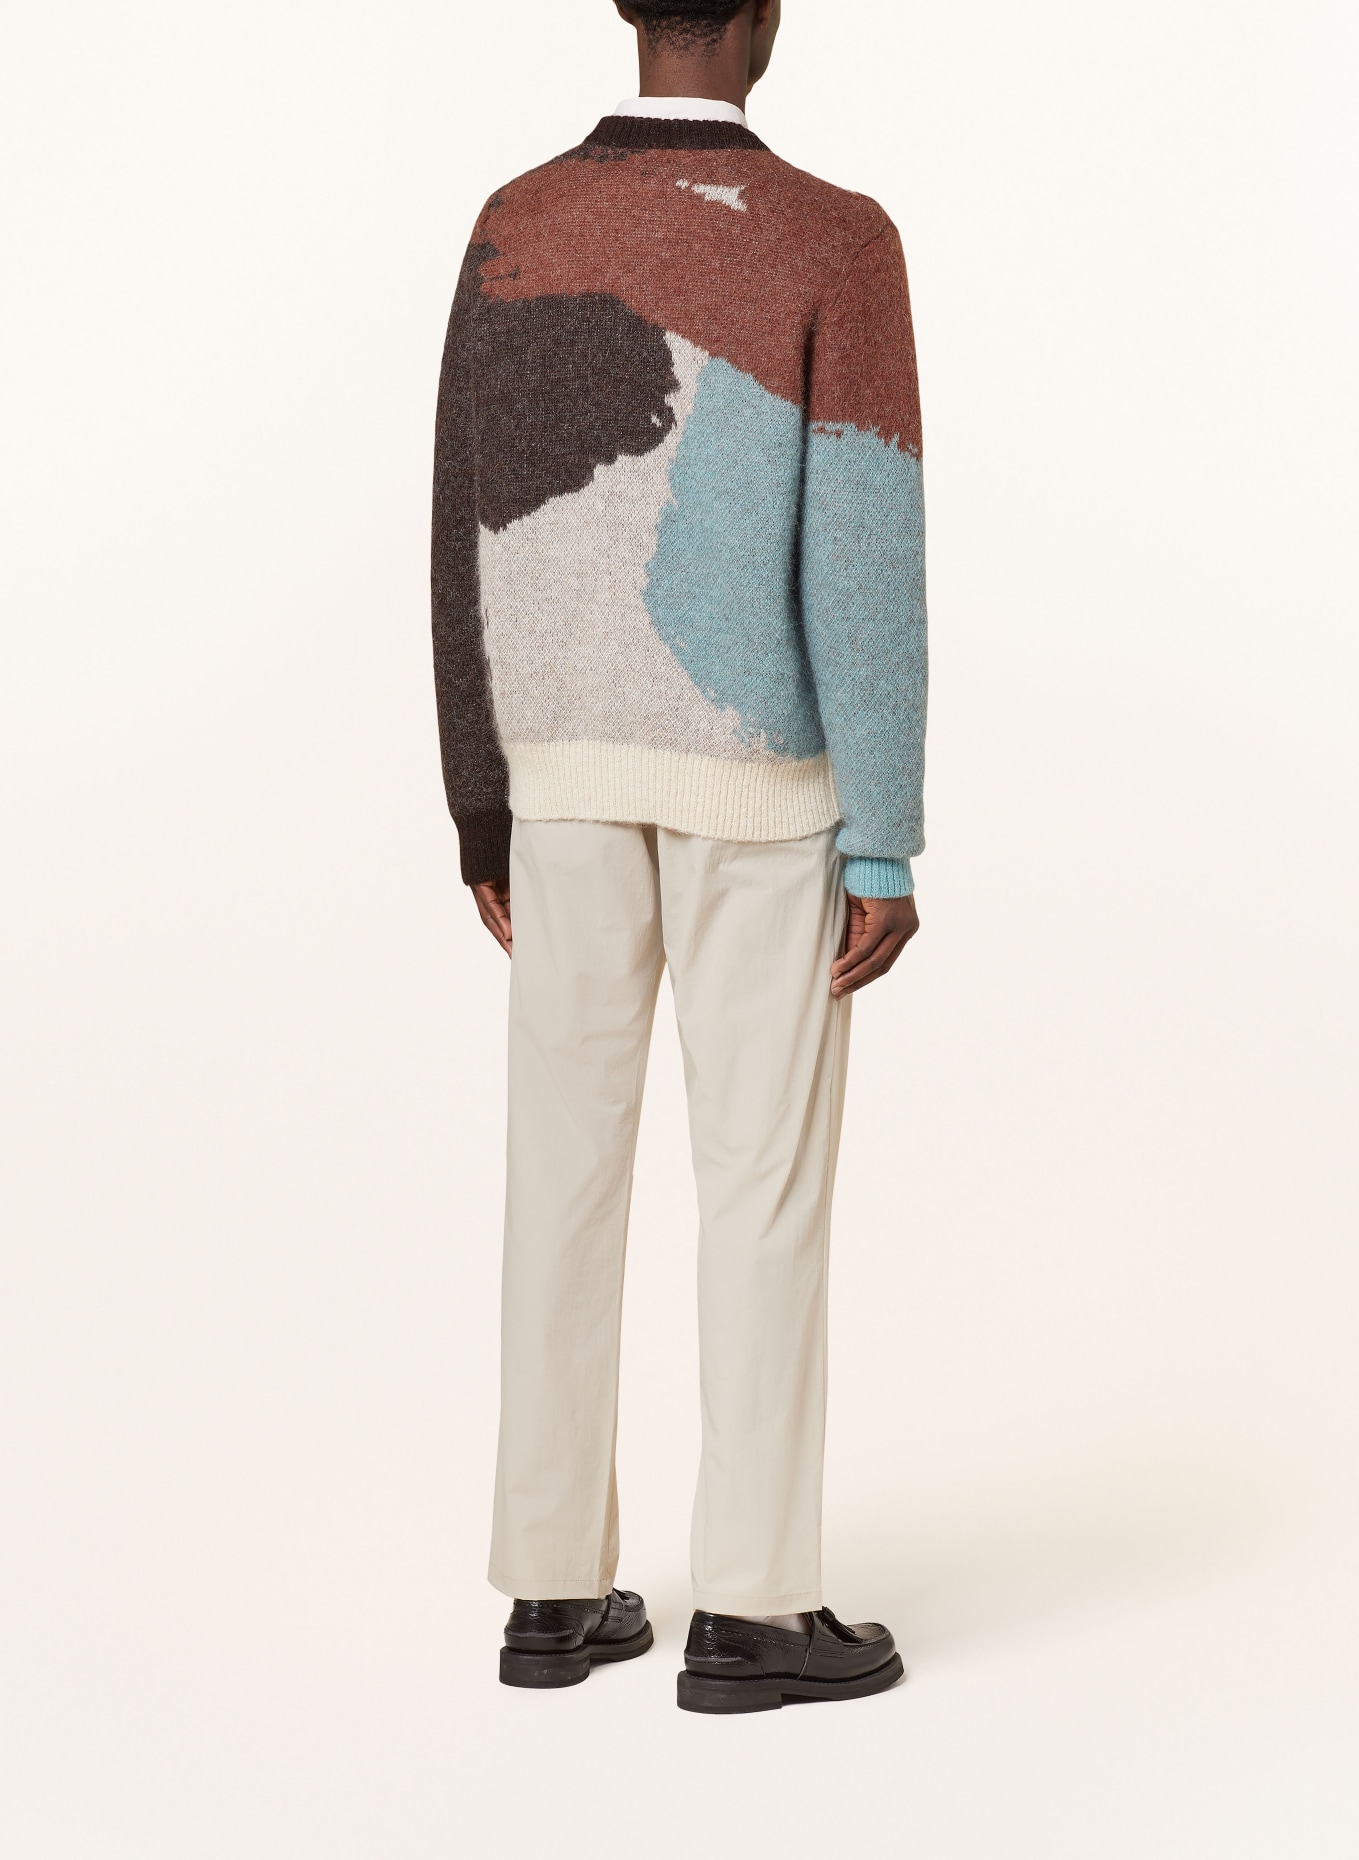 NORSE PROJECTS Sweater ARLID with alpaca and mohair, Color: DARK BROWN/ BEIGE/ MINT (Image 3)